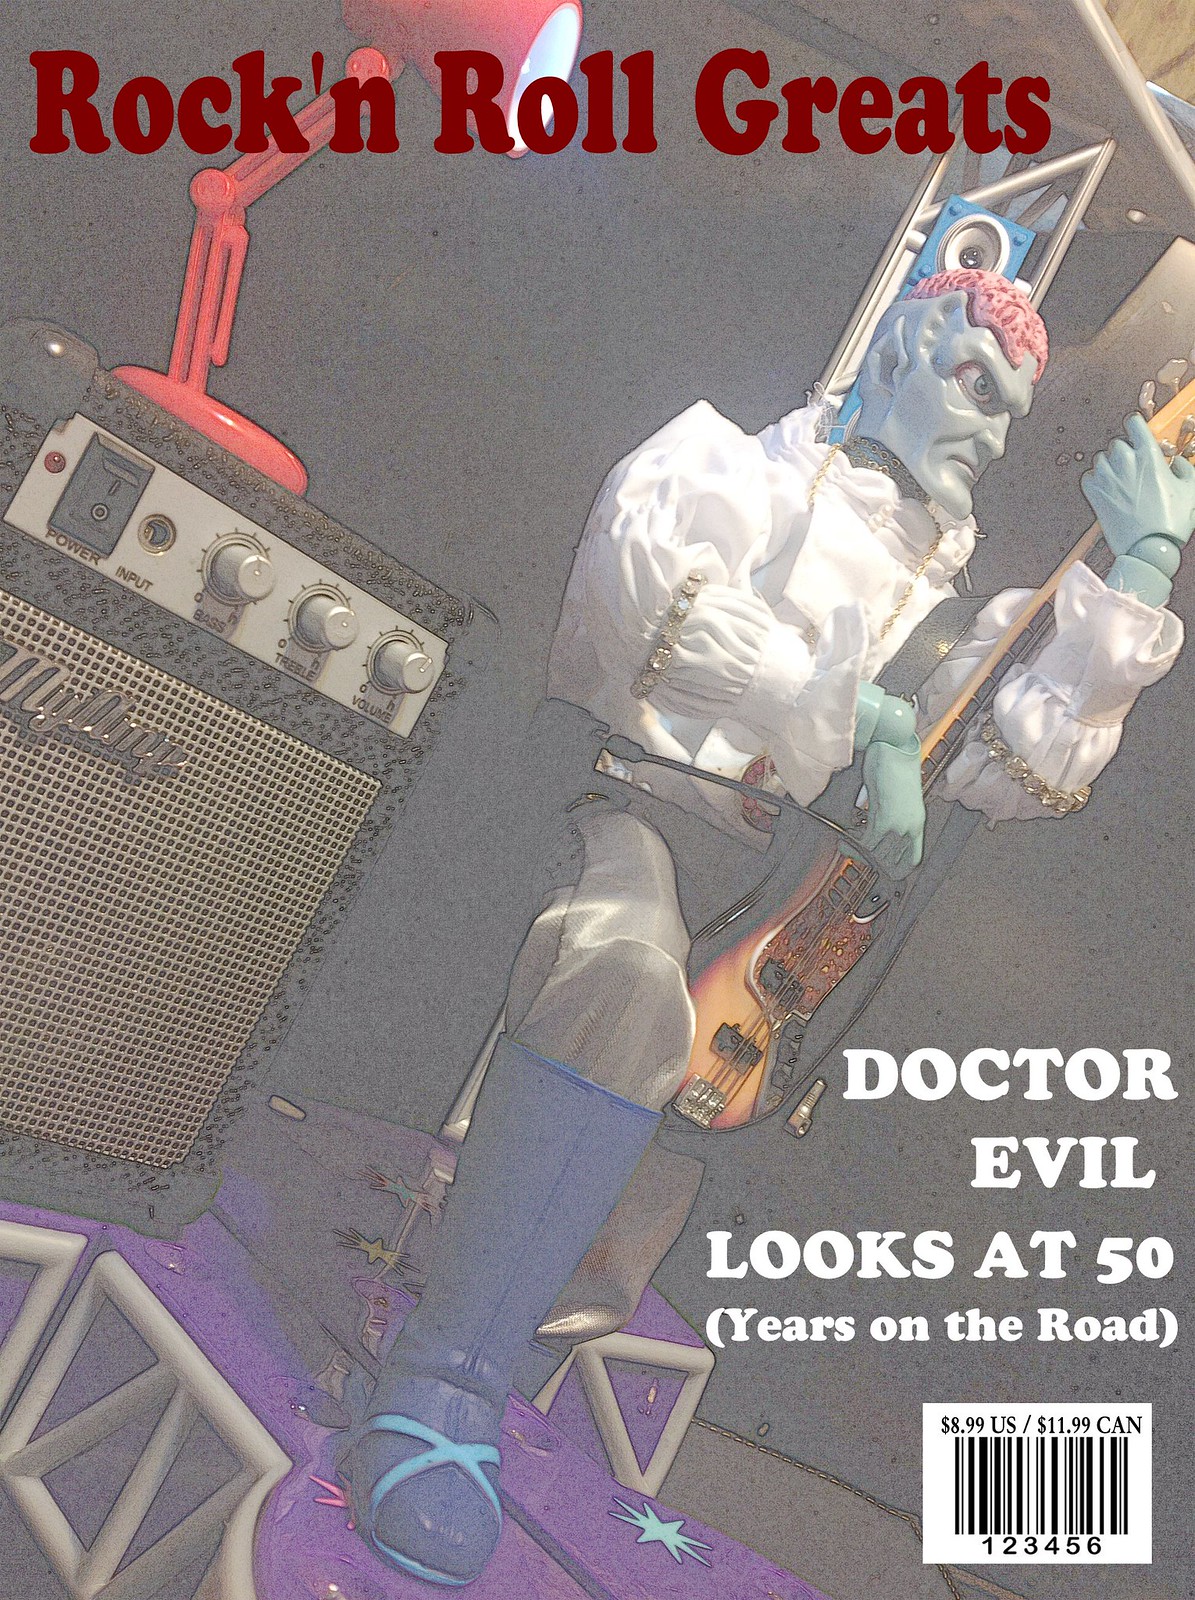 Rock'n Roll Greats:  The Evil Looks at 50, Chapter 1 + NOW TEASER FOR CHAPTER 2 41567671781_677c6ac36c_h